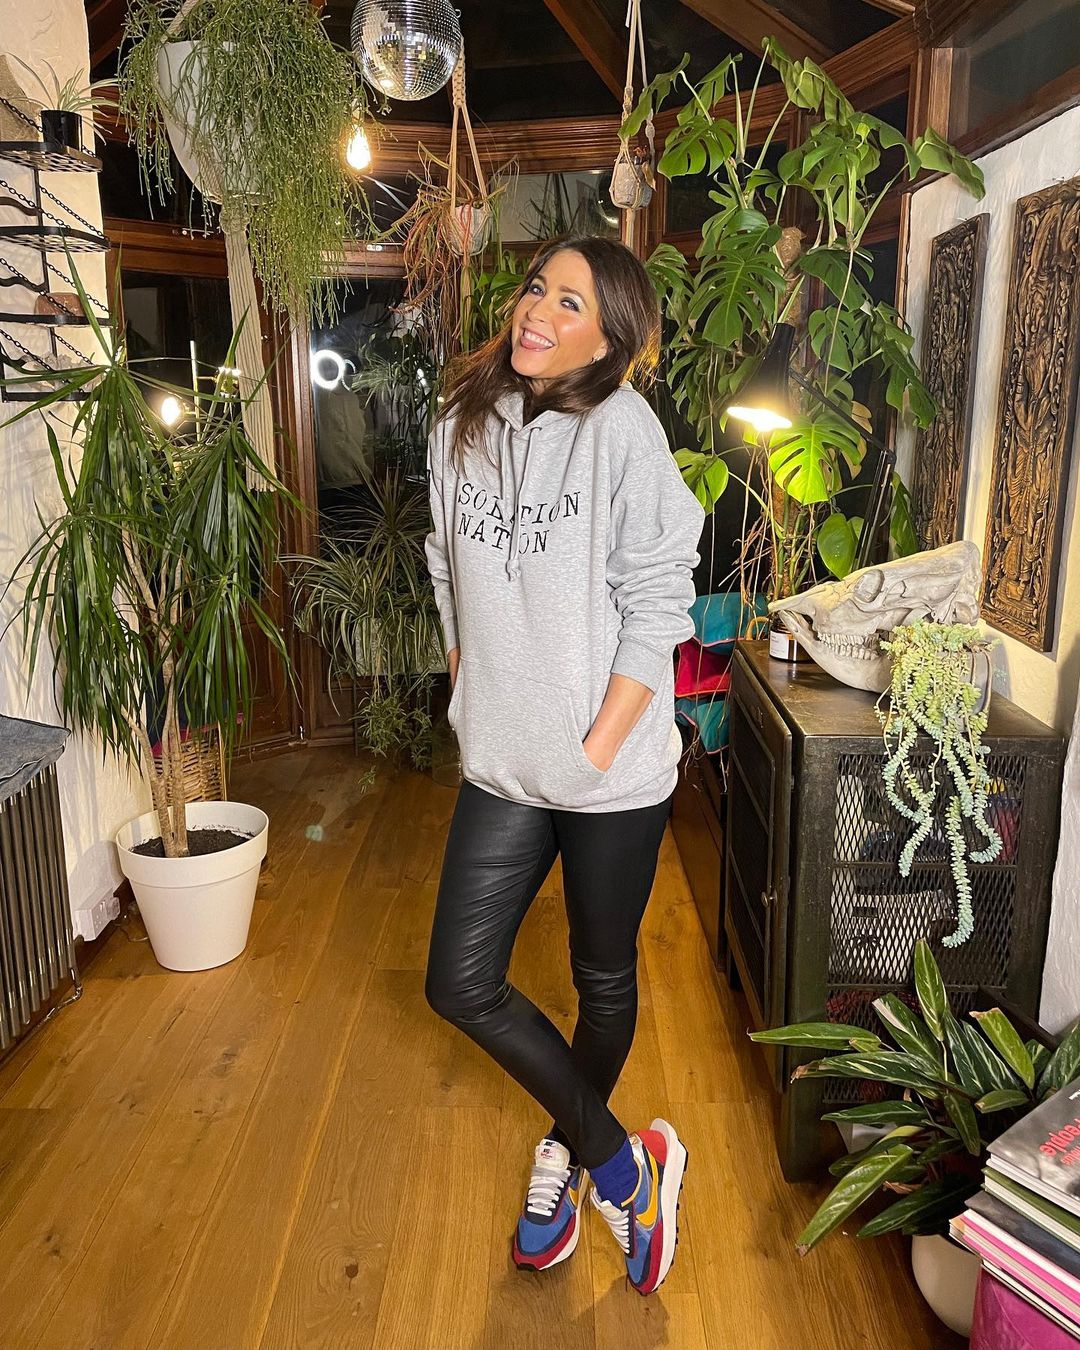 A photo showing Lisa Snowdon sporting a gray hoodie and black leather pant in the comfort of her home.